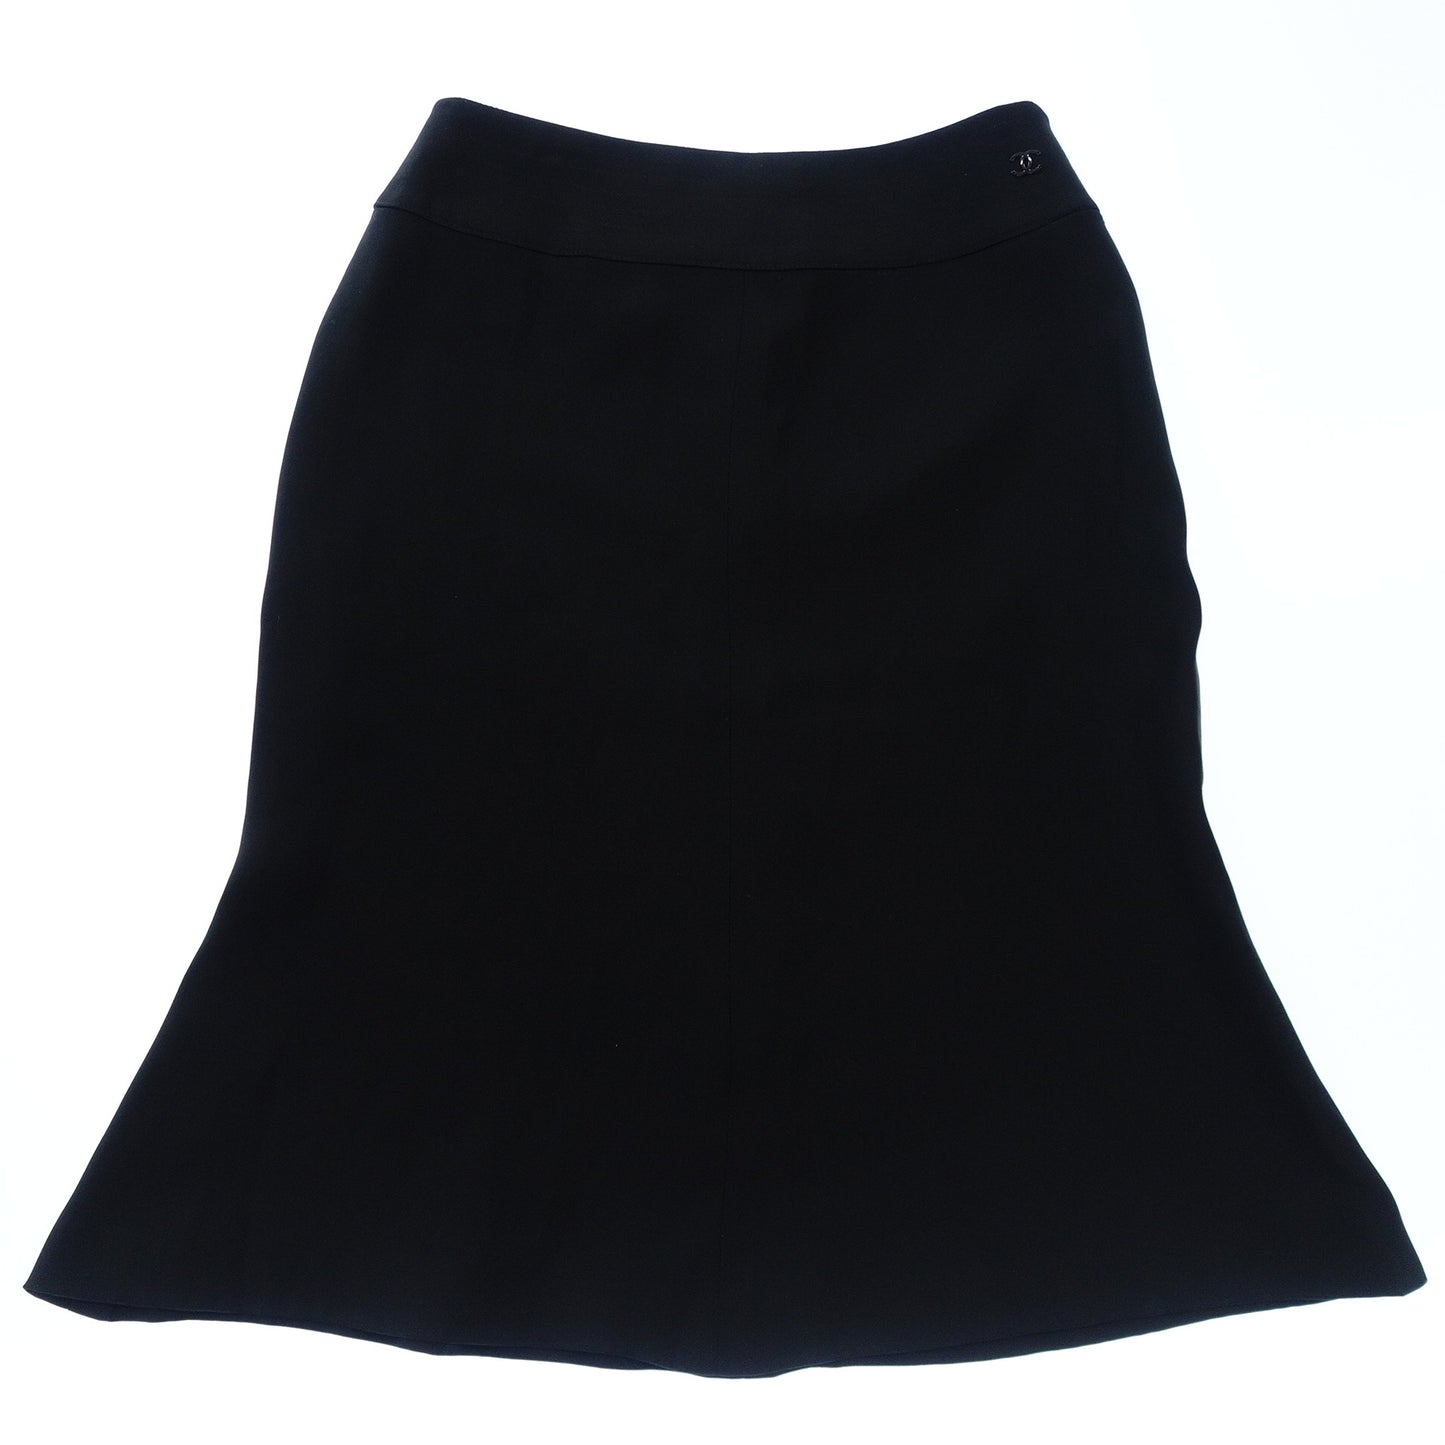 CHANEL Skirt 04P Black Size 34 Women's CHANEL [AFB22] [Used] 